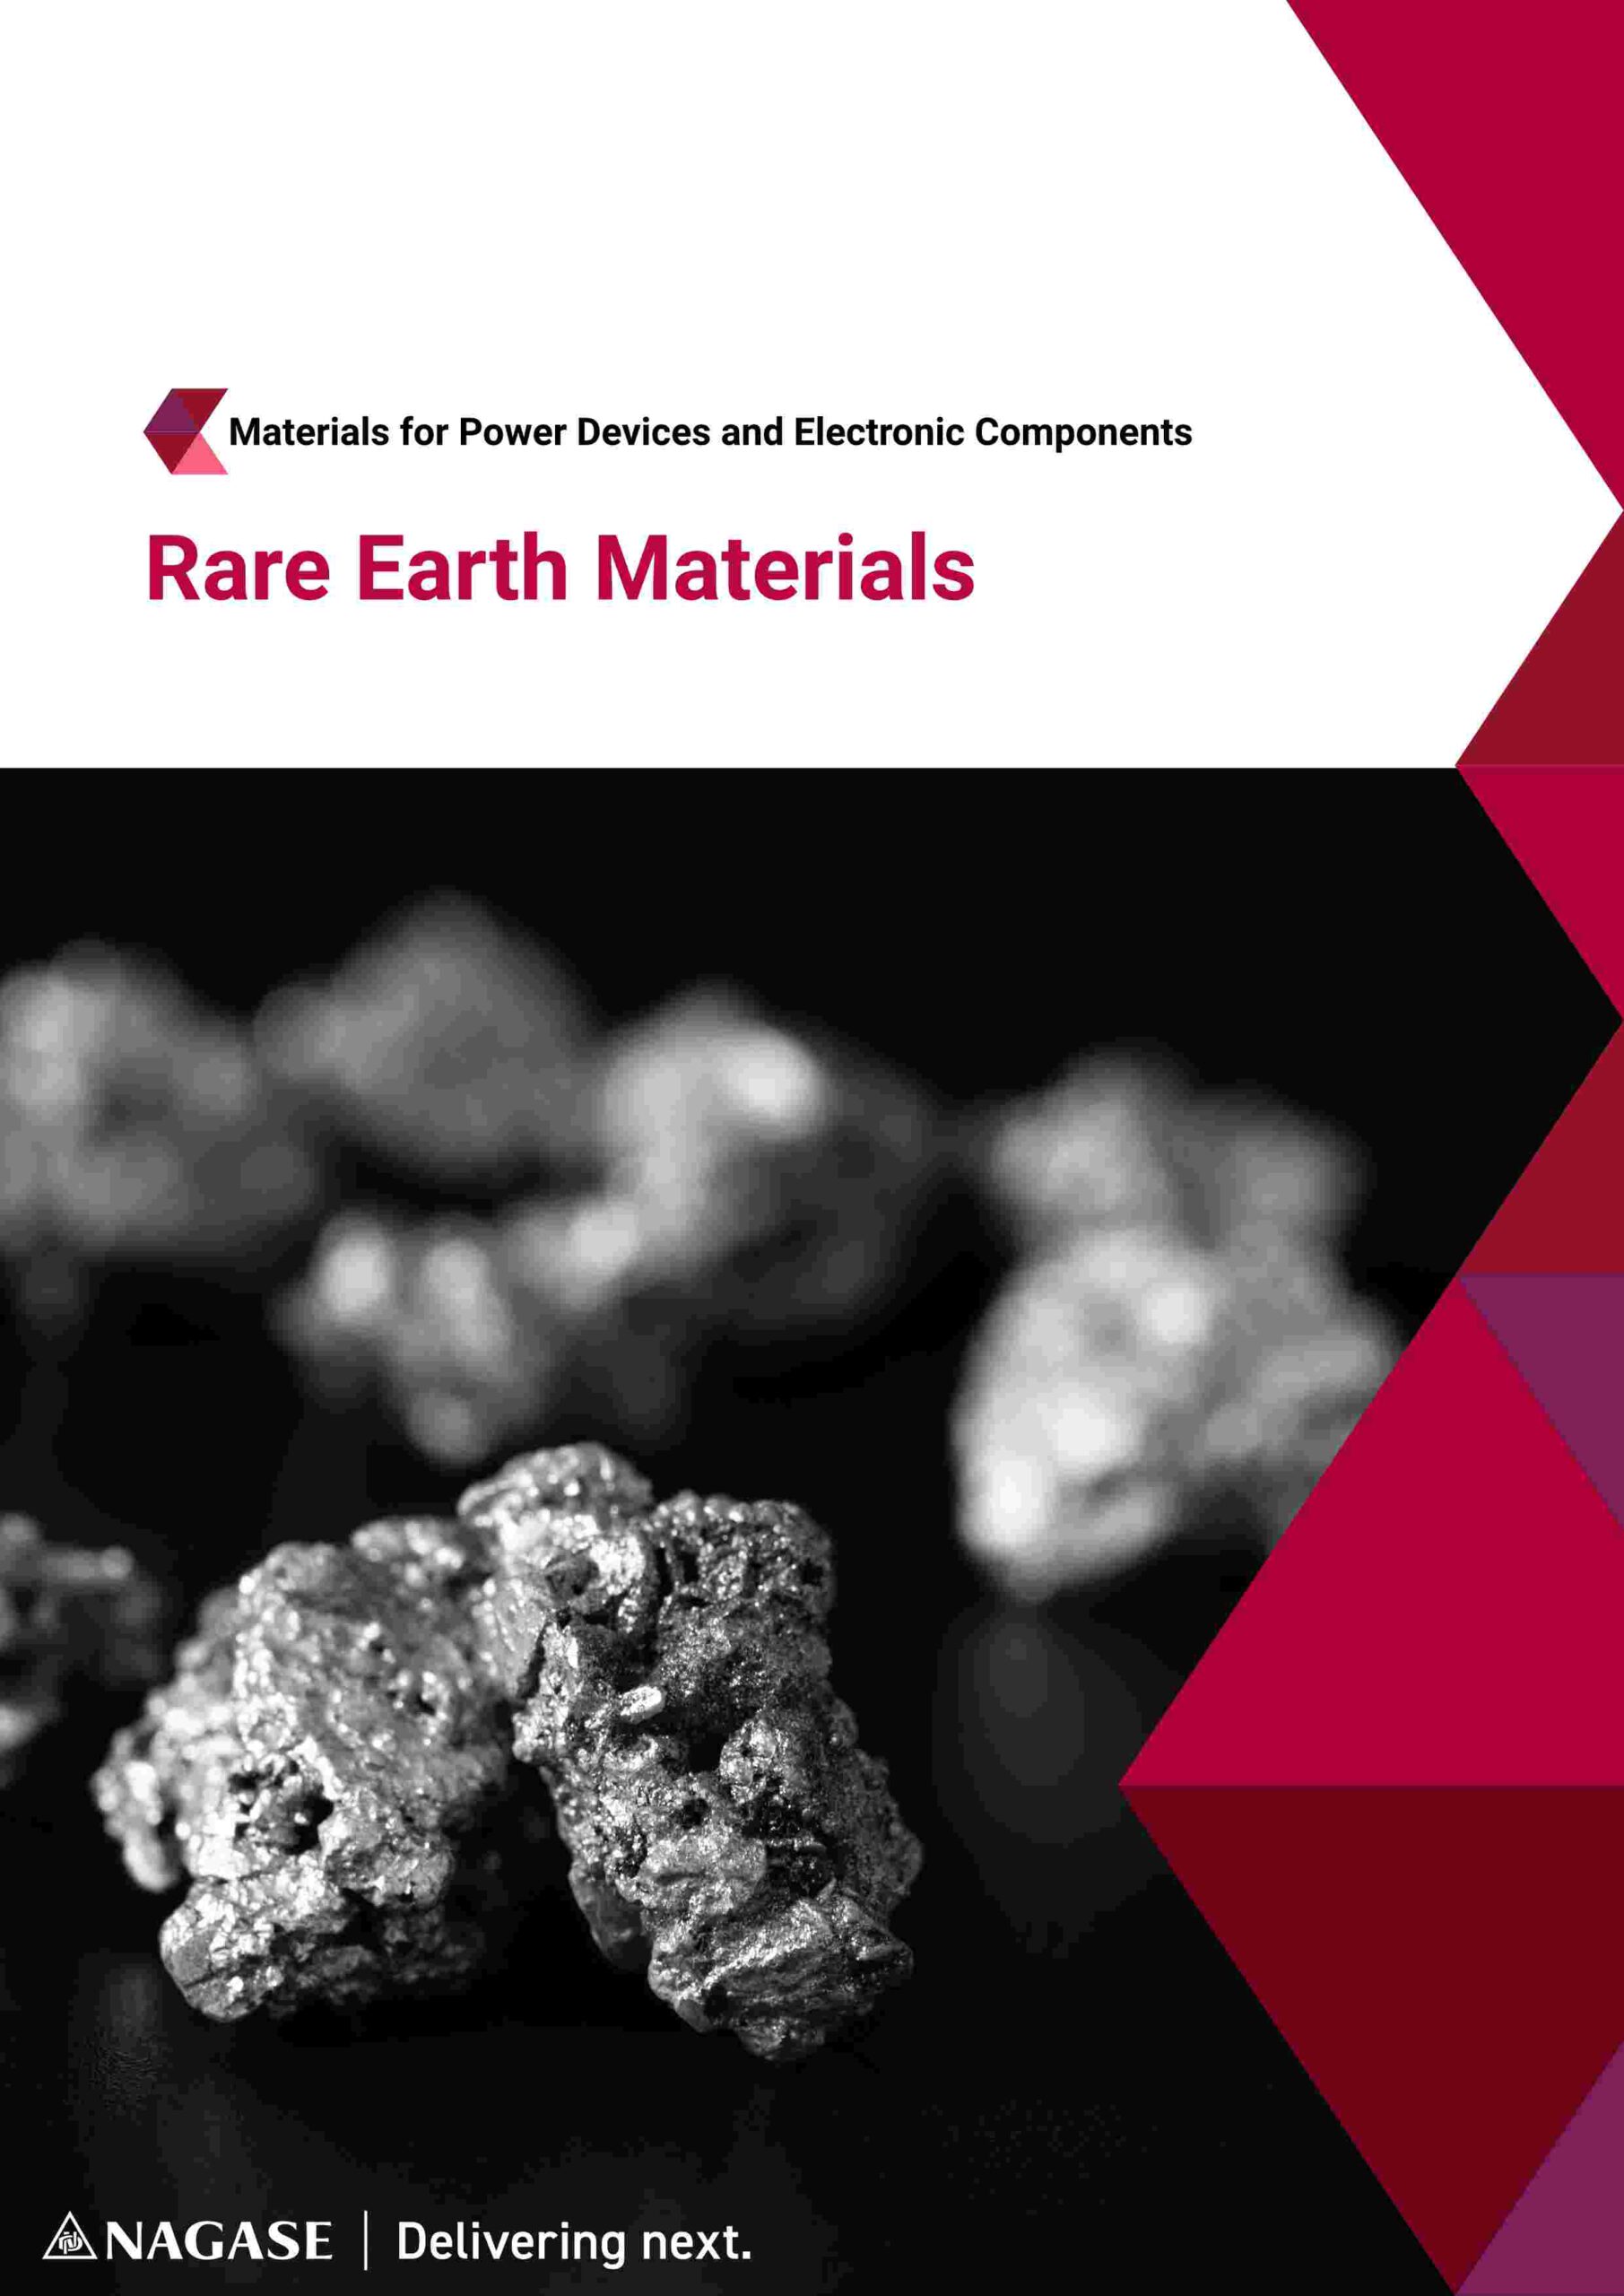 Product flyer about our rare earth material offering